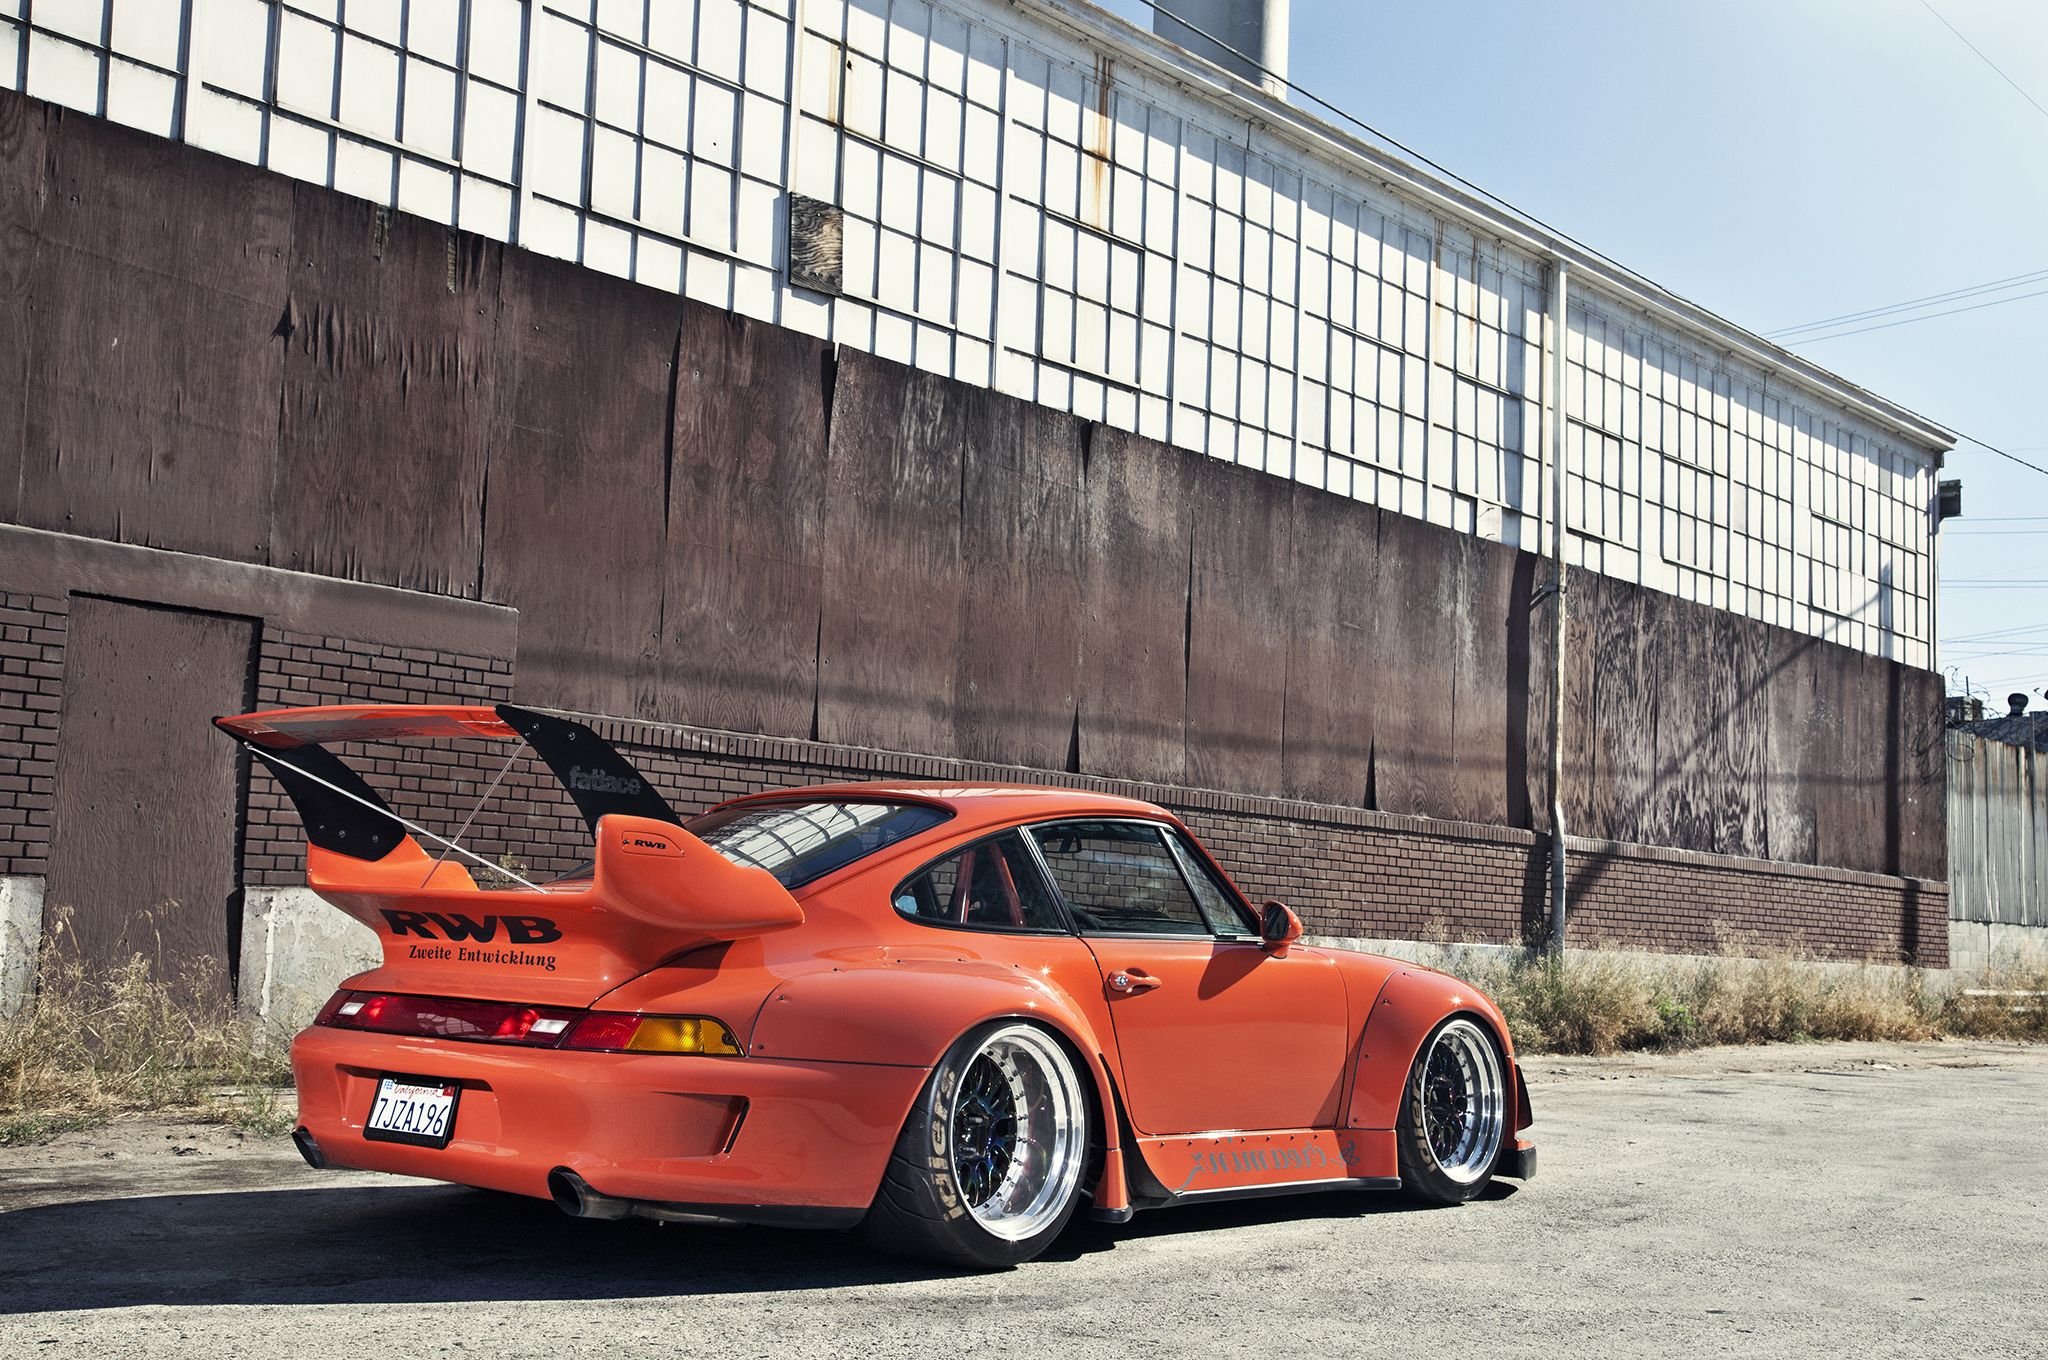 1995 Porsche 911 Widebody Kit Rwb Coupe Cars Wallpapers Hd Desktop And Mobile Backgrounds